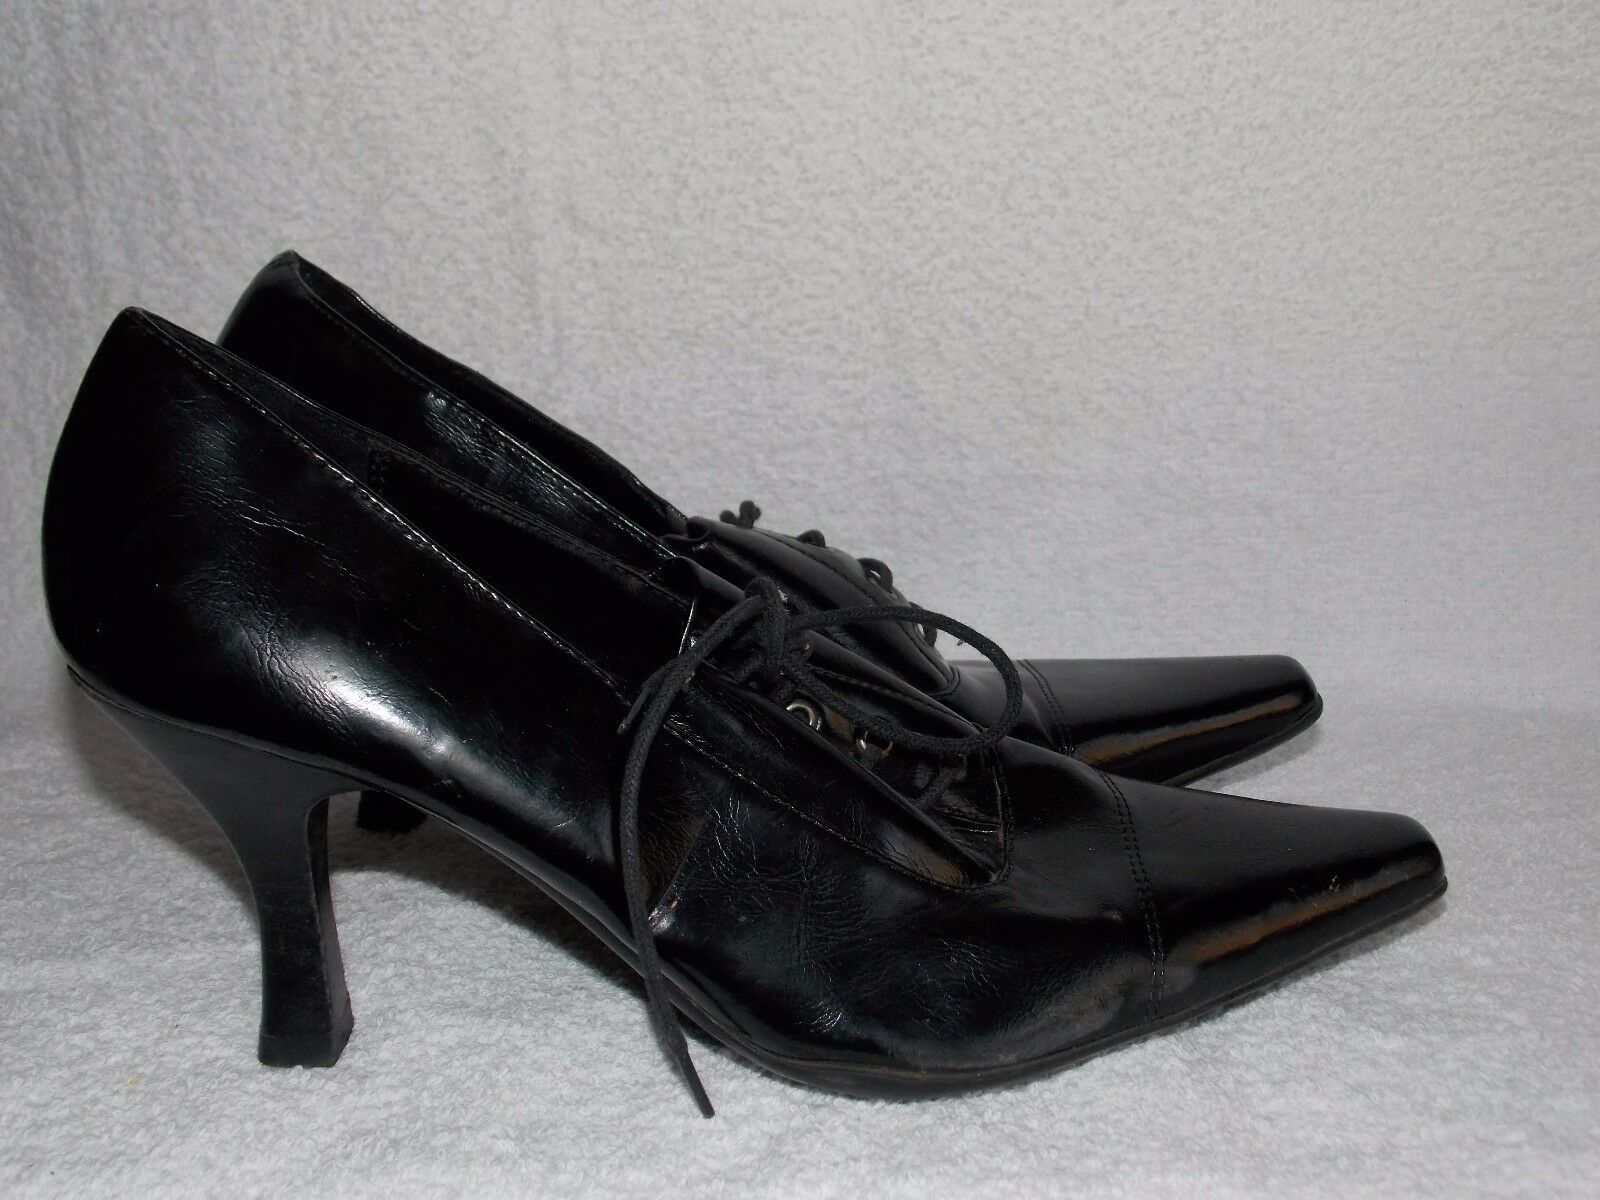 Etienne Aigner Black Leather LISBON Pointy Lace Up Heels 9 For Women Used - $34.64